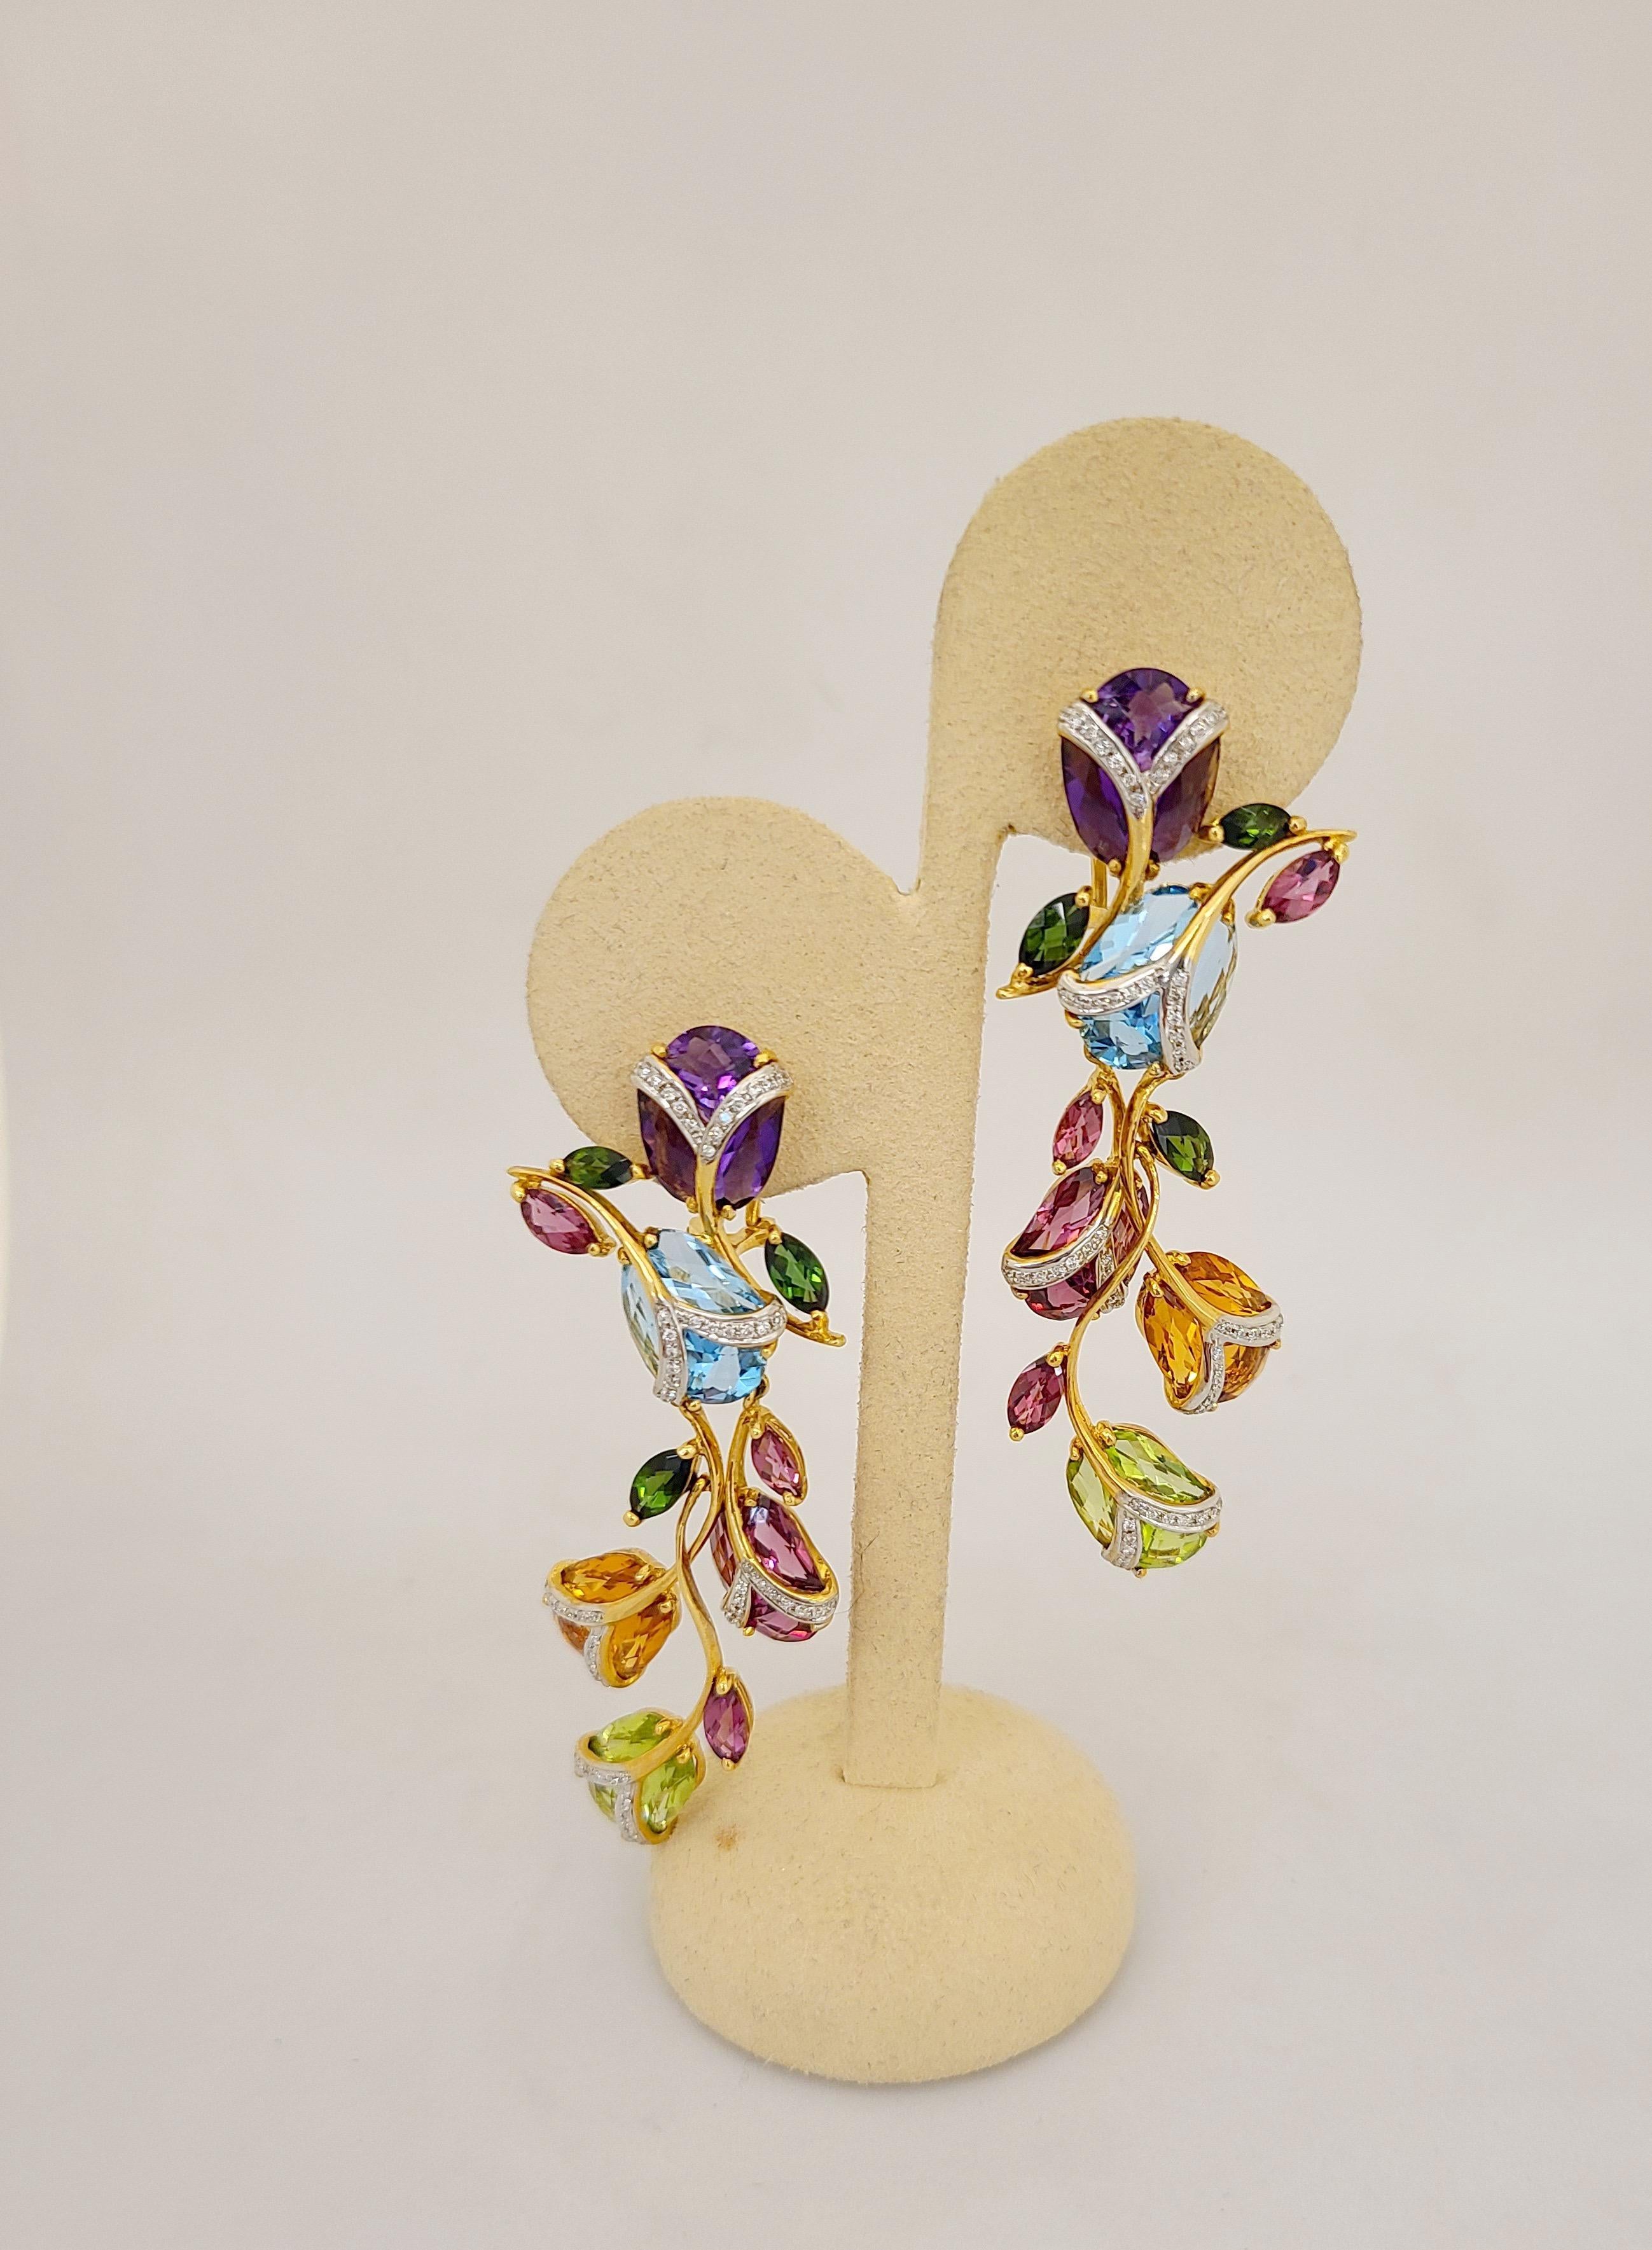 These beautiful Cellini Jewelers NYC elongated 18 karat yellow gold earrings are designed with semi precious stones set in tulip motifs accented with diamonds. The light and airy settings include semi precious stones of amethyst, citrine, blue